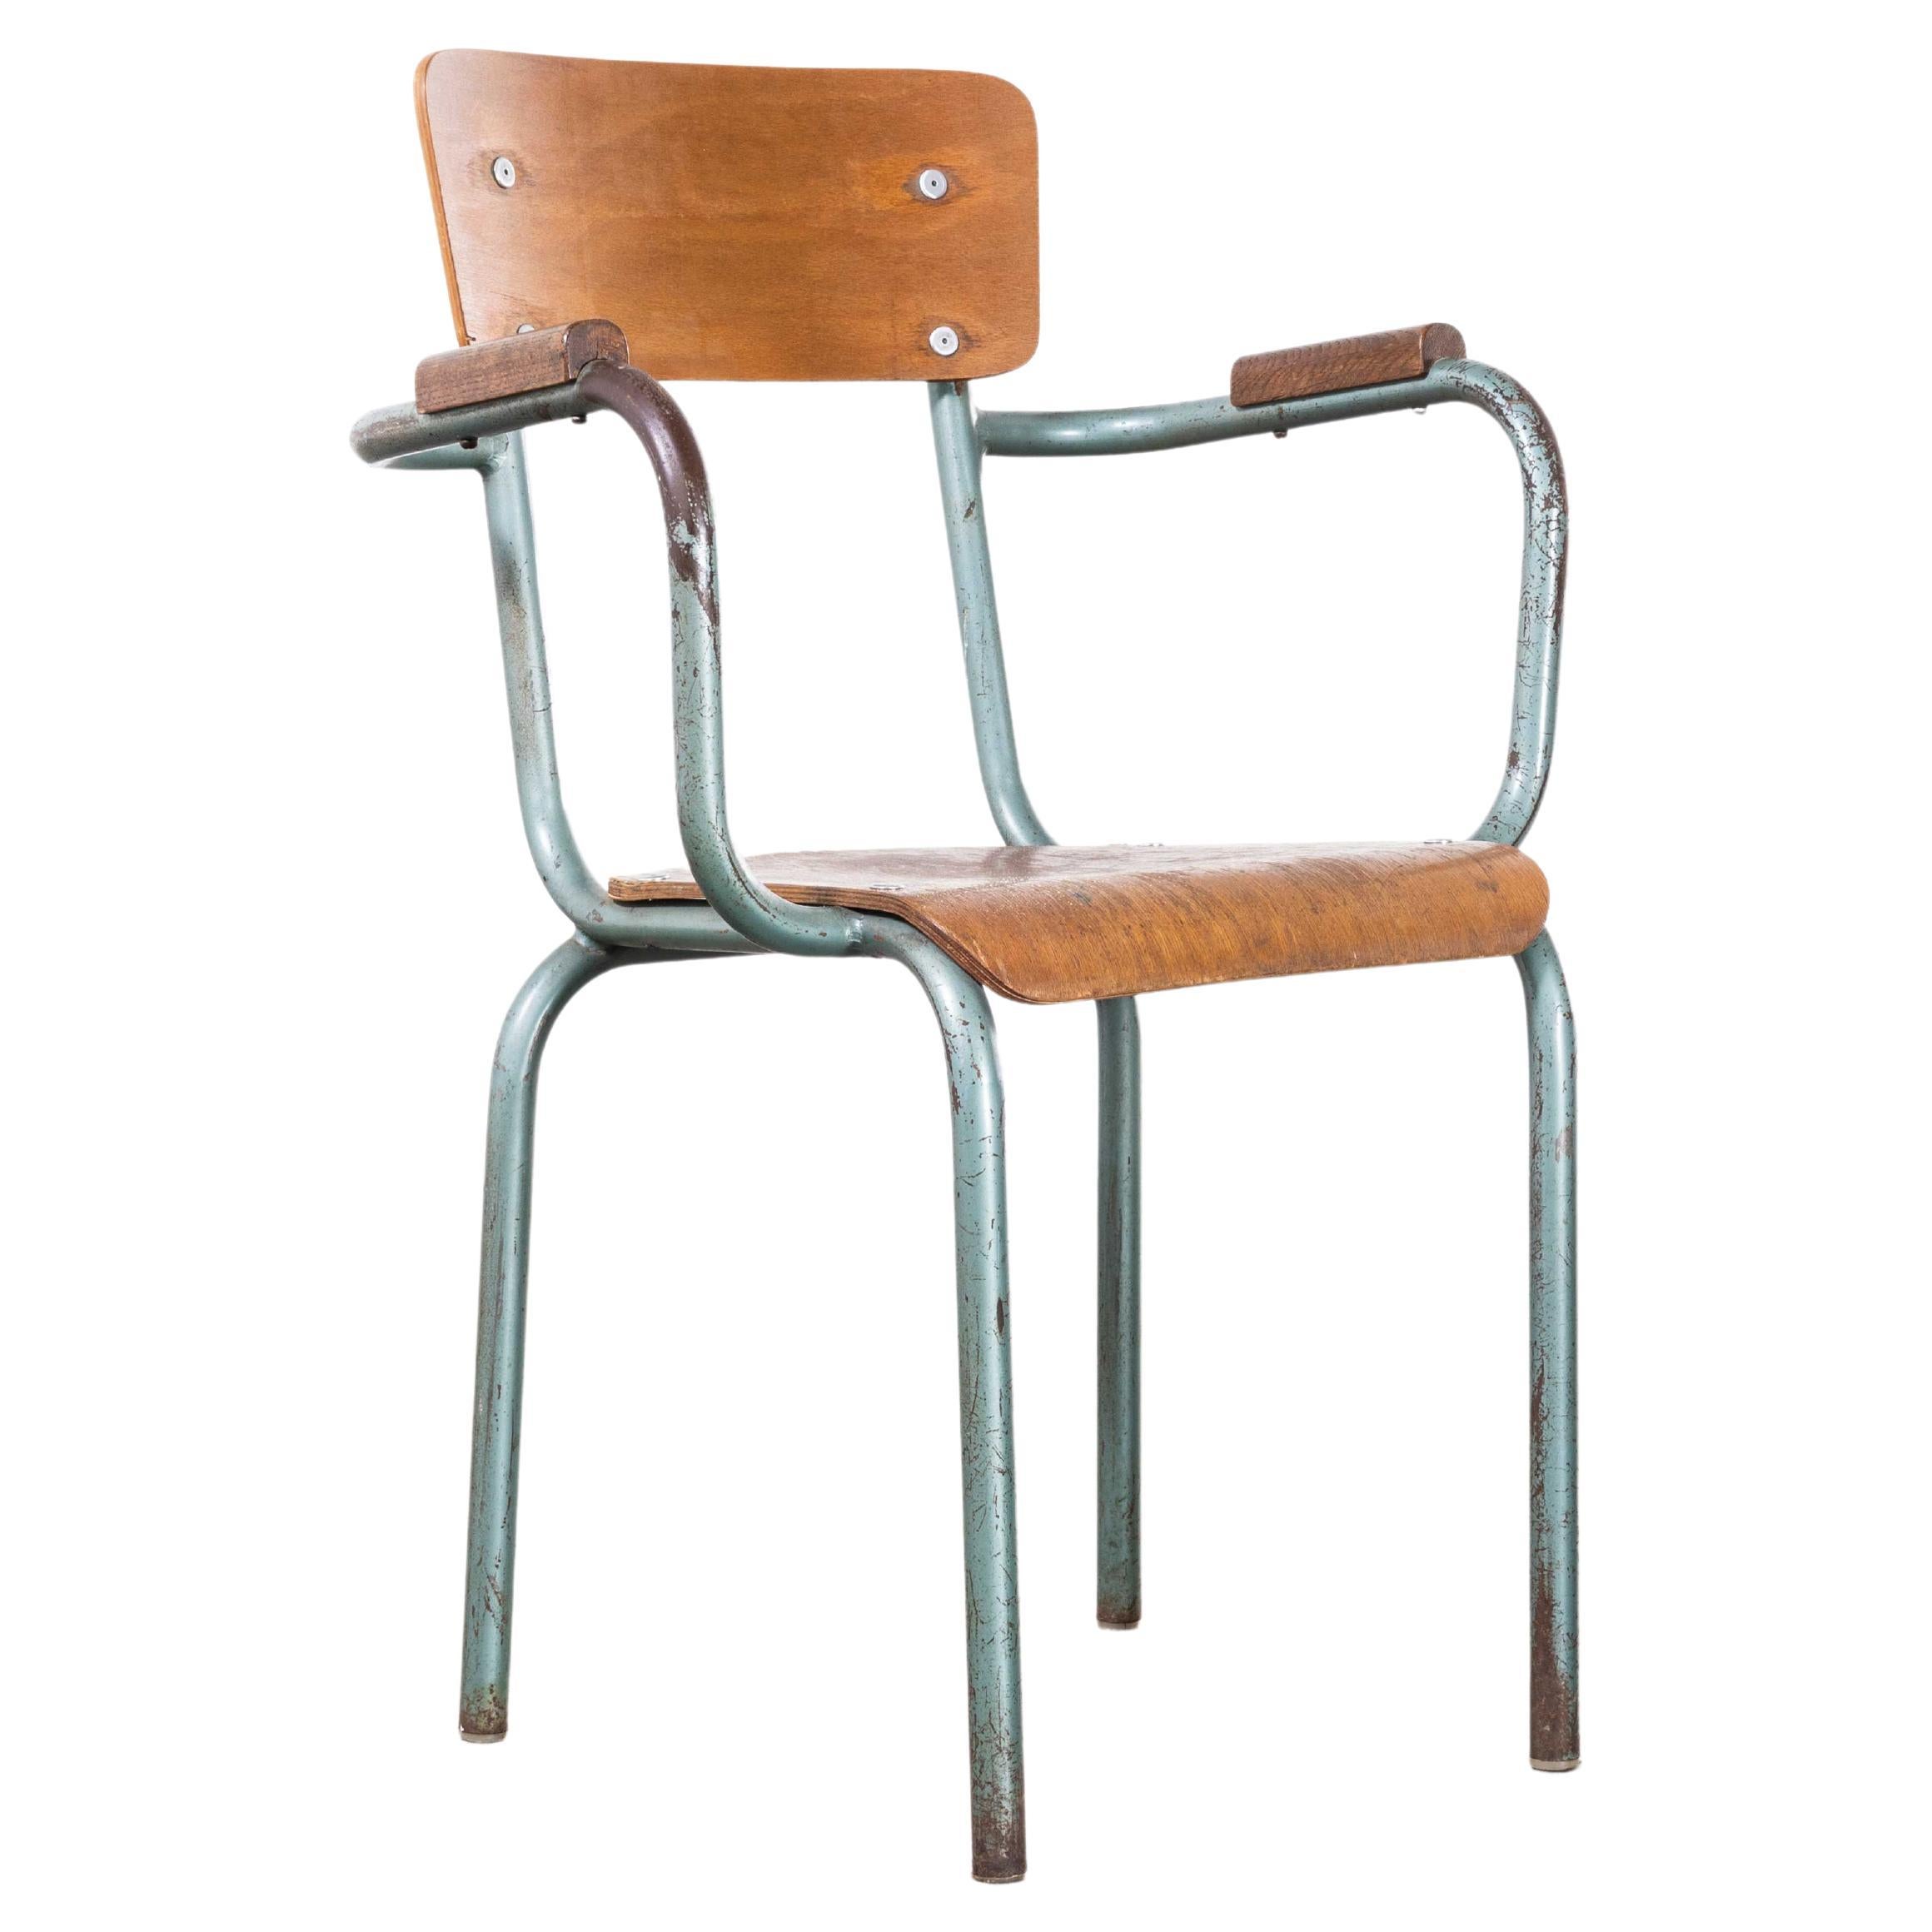 1950s Original French Mullca Armchair, Desk Chair For Sale at 1stDibs